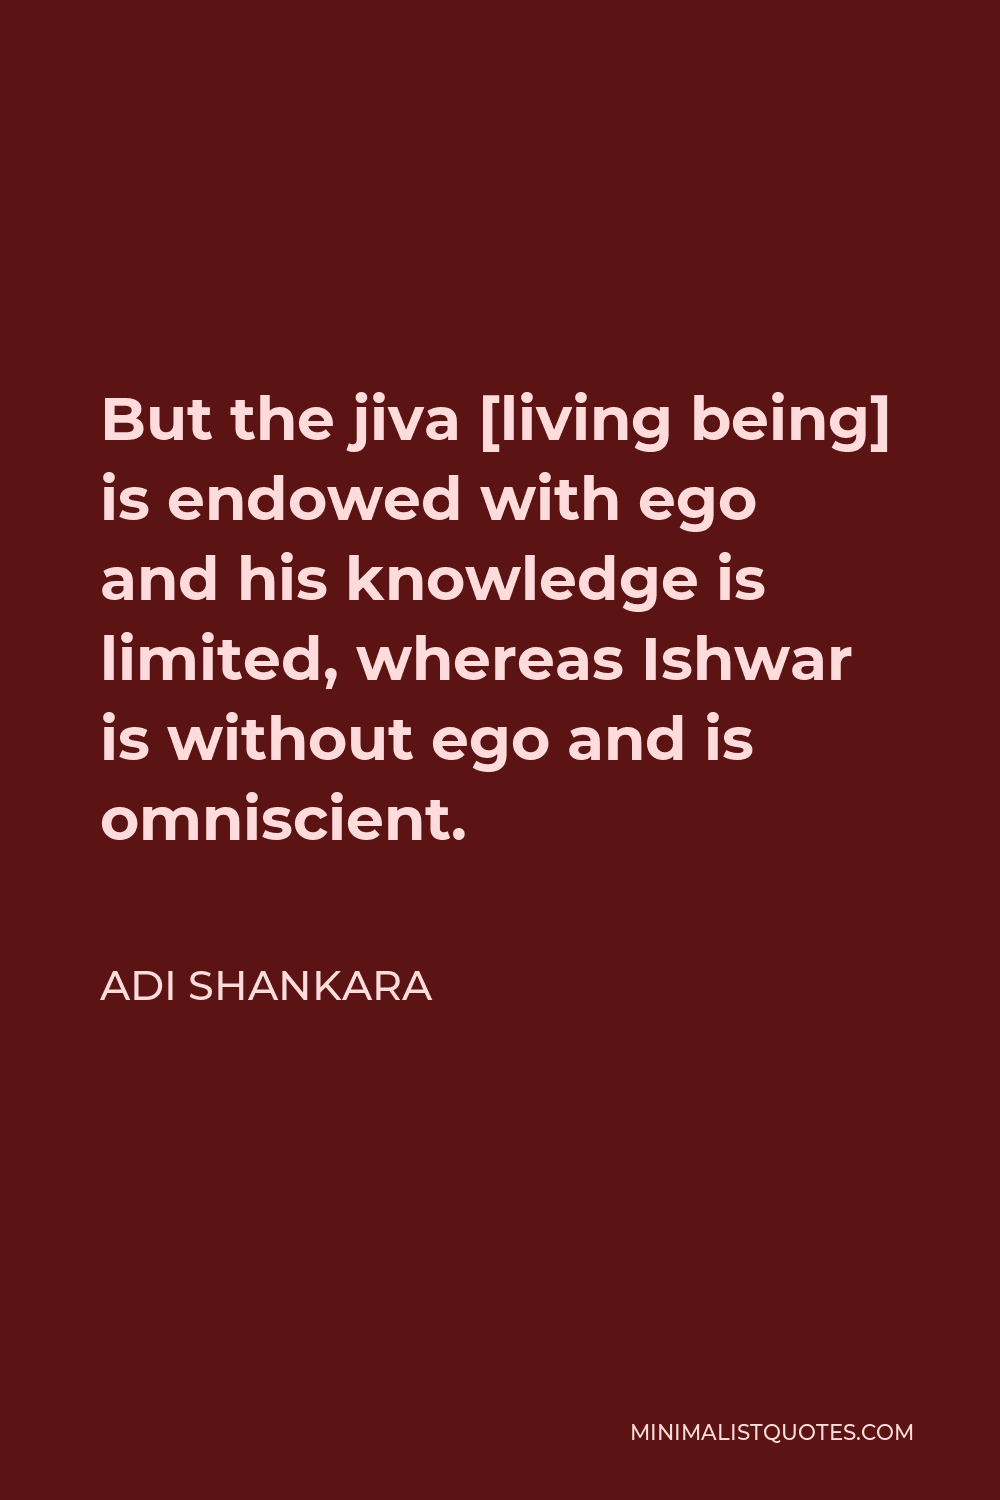 Adi Shankara Quote - But the jiva [living being] is endowed with ego and his knowledge is limited, whereas Ishwar is without ego and is omniscient.